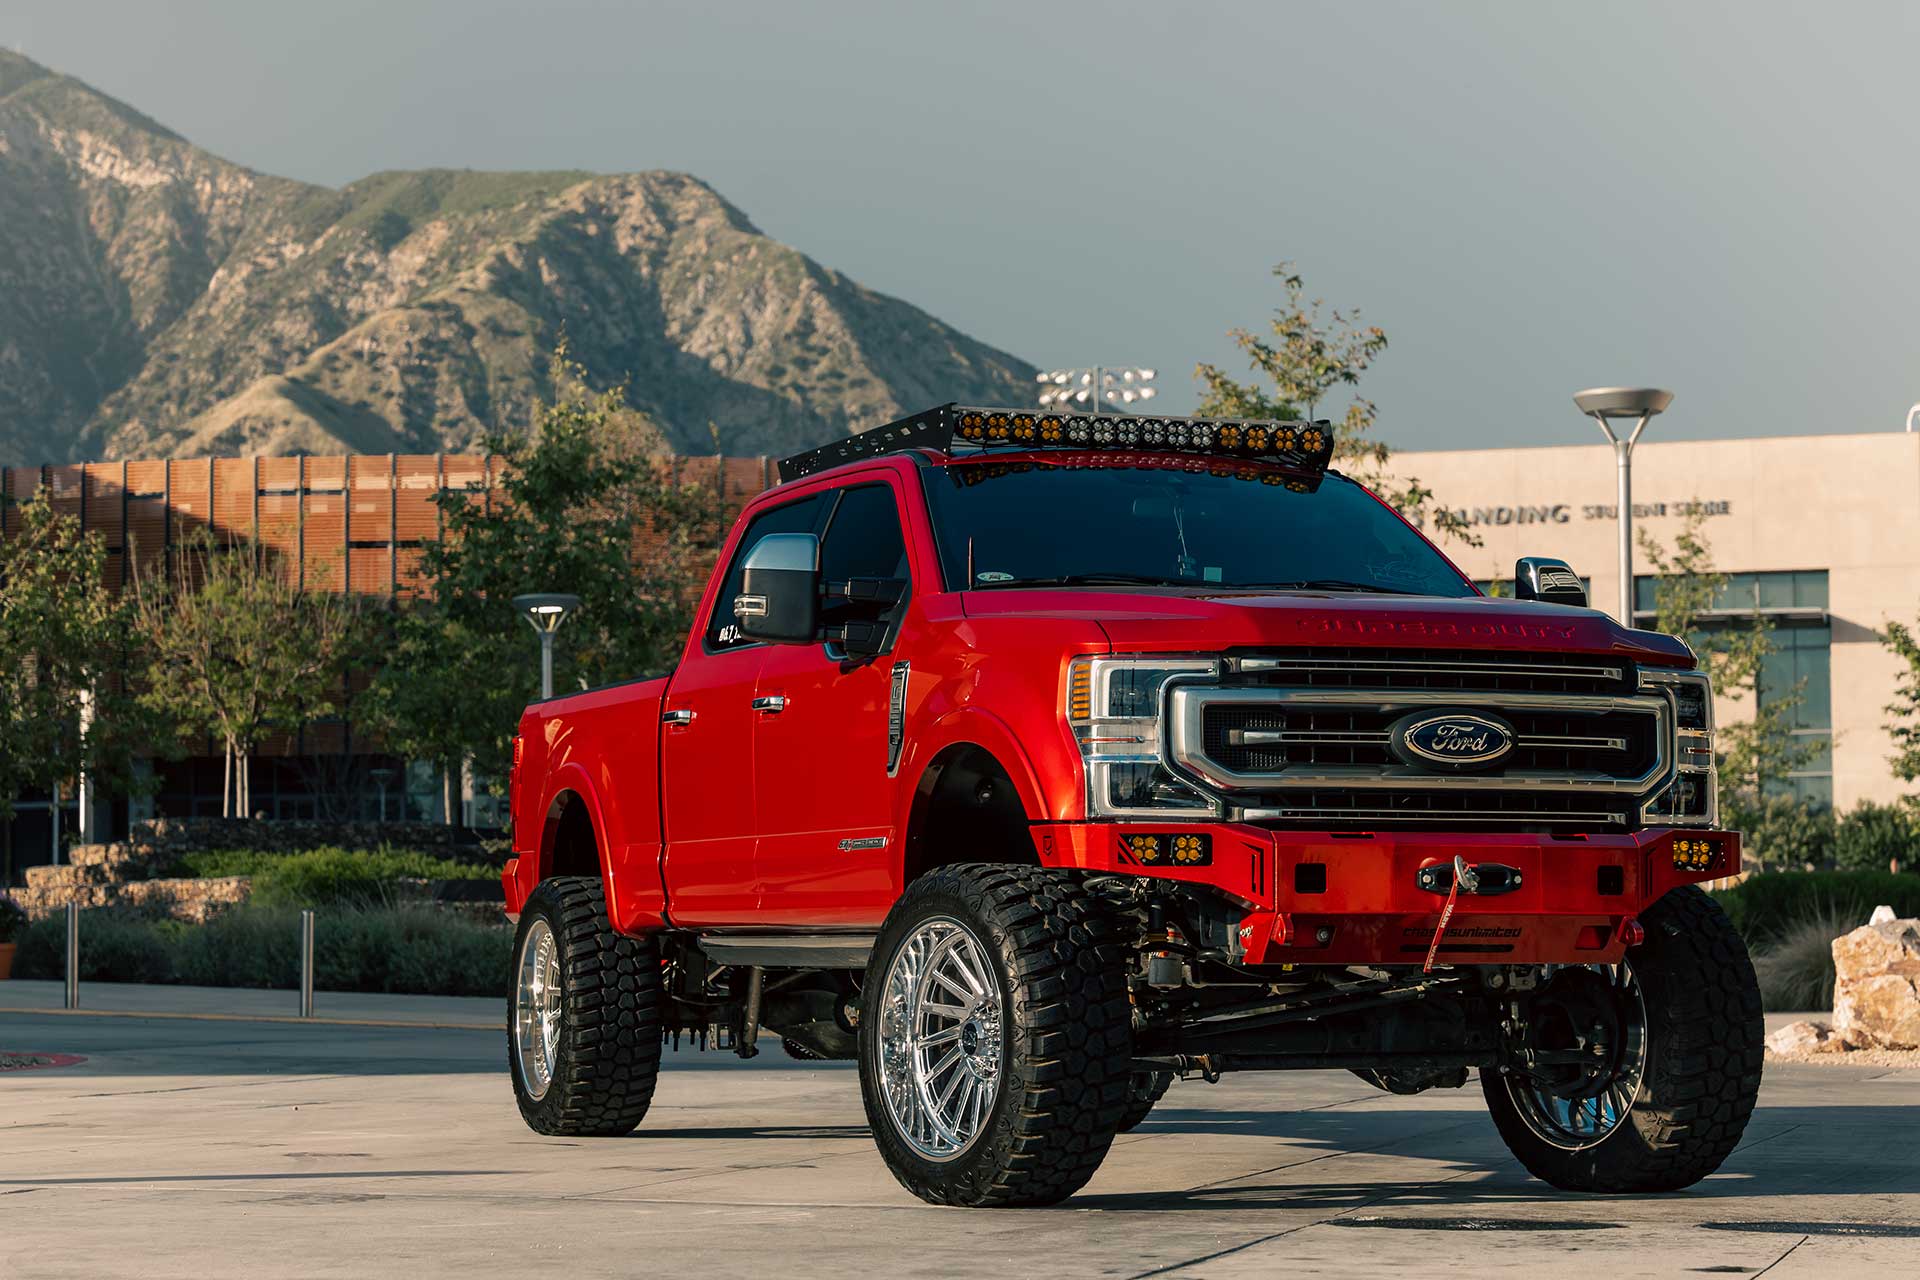 A red Ford F-350 Super Duty with RBP Repulsor M/T RX off-road tires